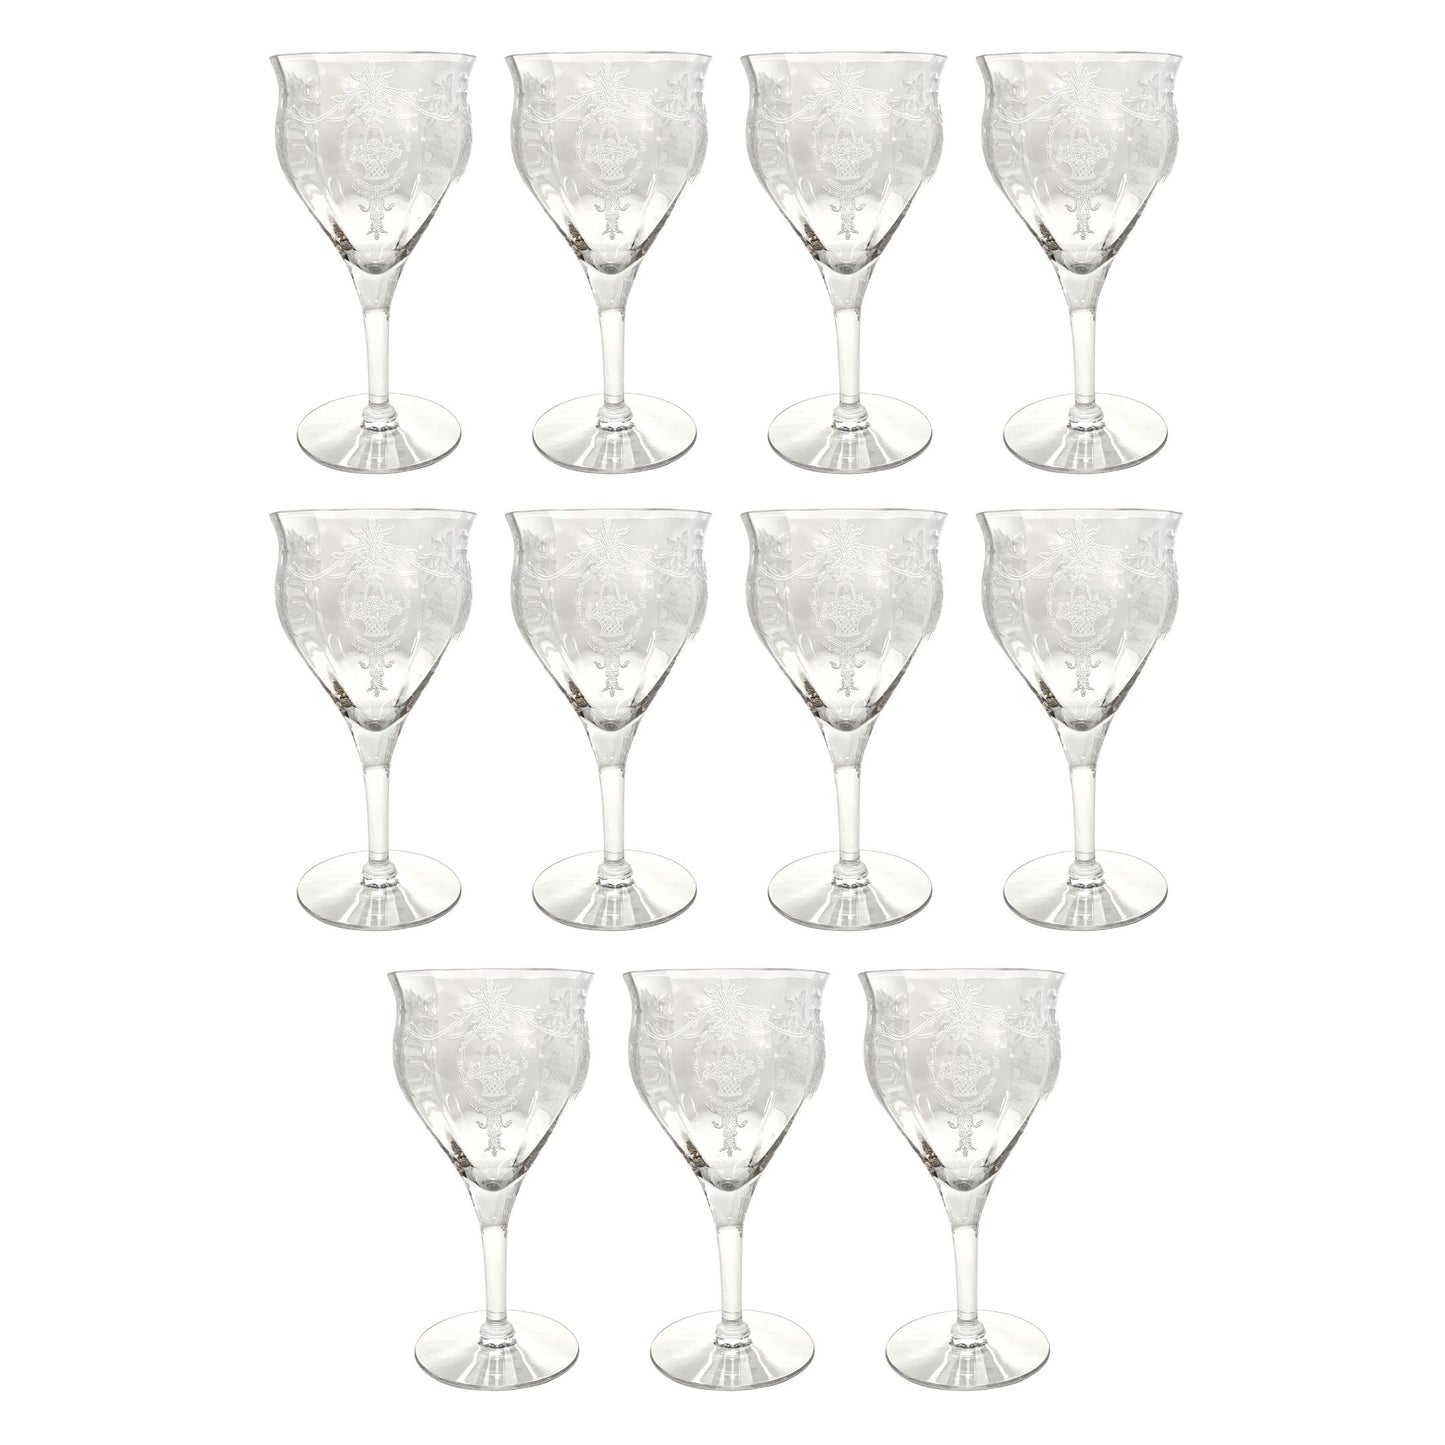 Tiffin-Franciscan "Adam Clear" Optic Crystal Water Goblets (11)